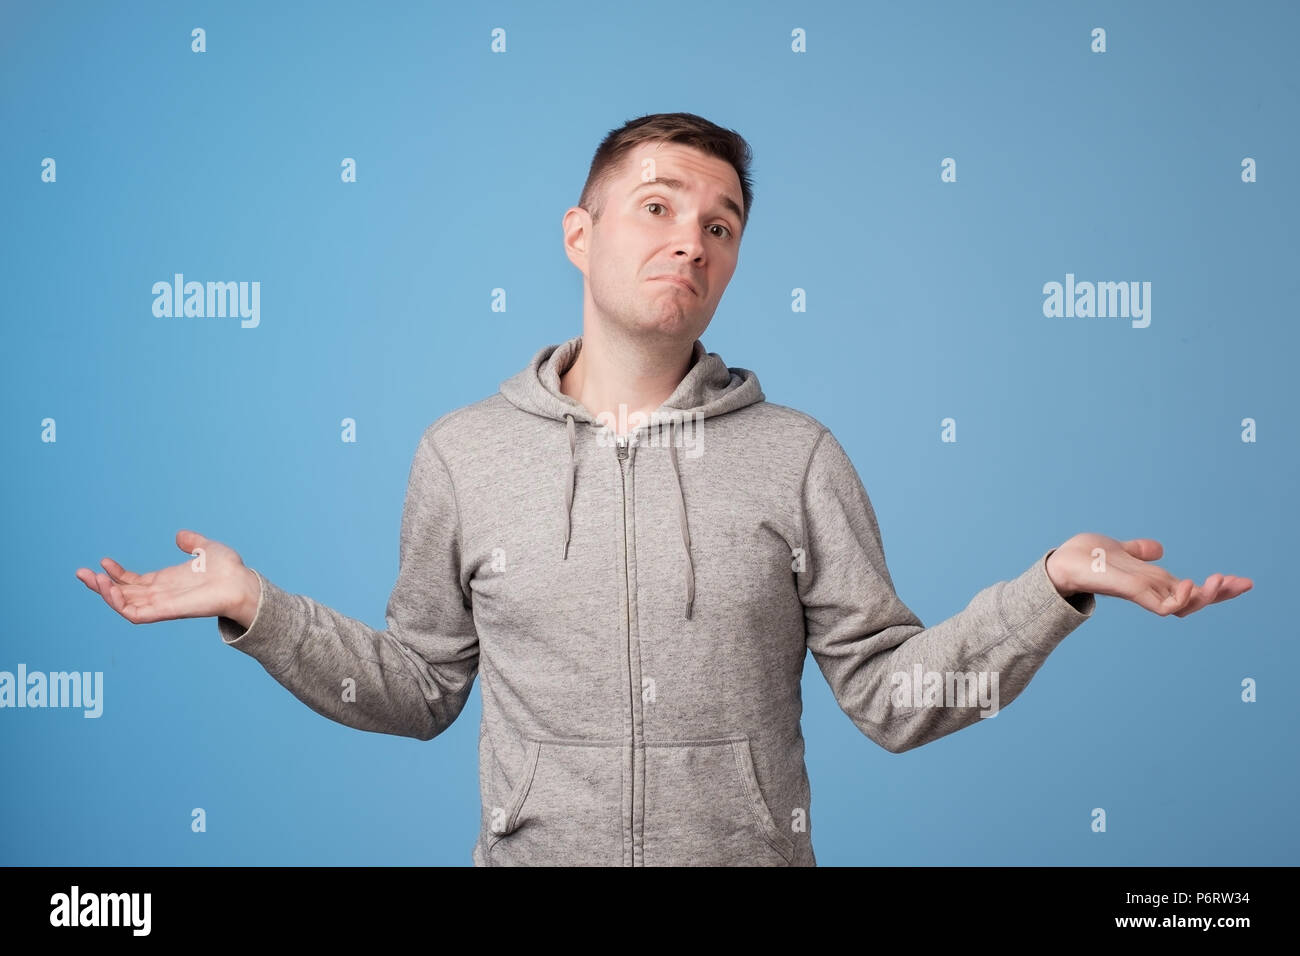 Studio portrait of confused handsome guy showing I have no idea gesture. Stock Photo